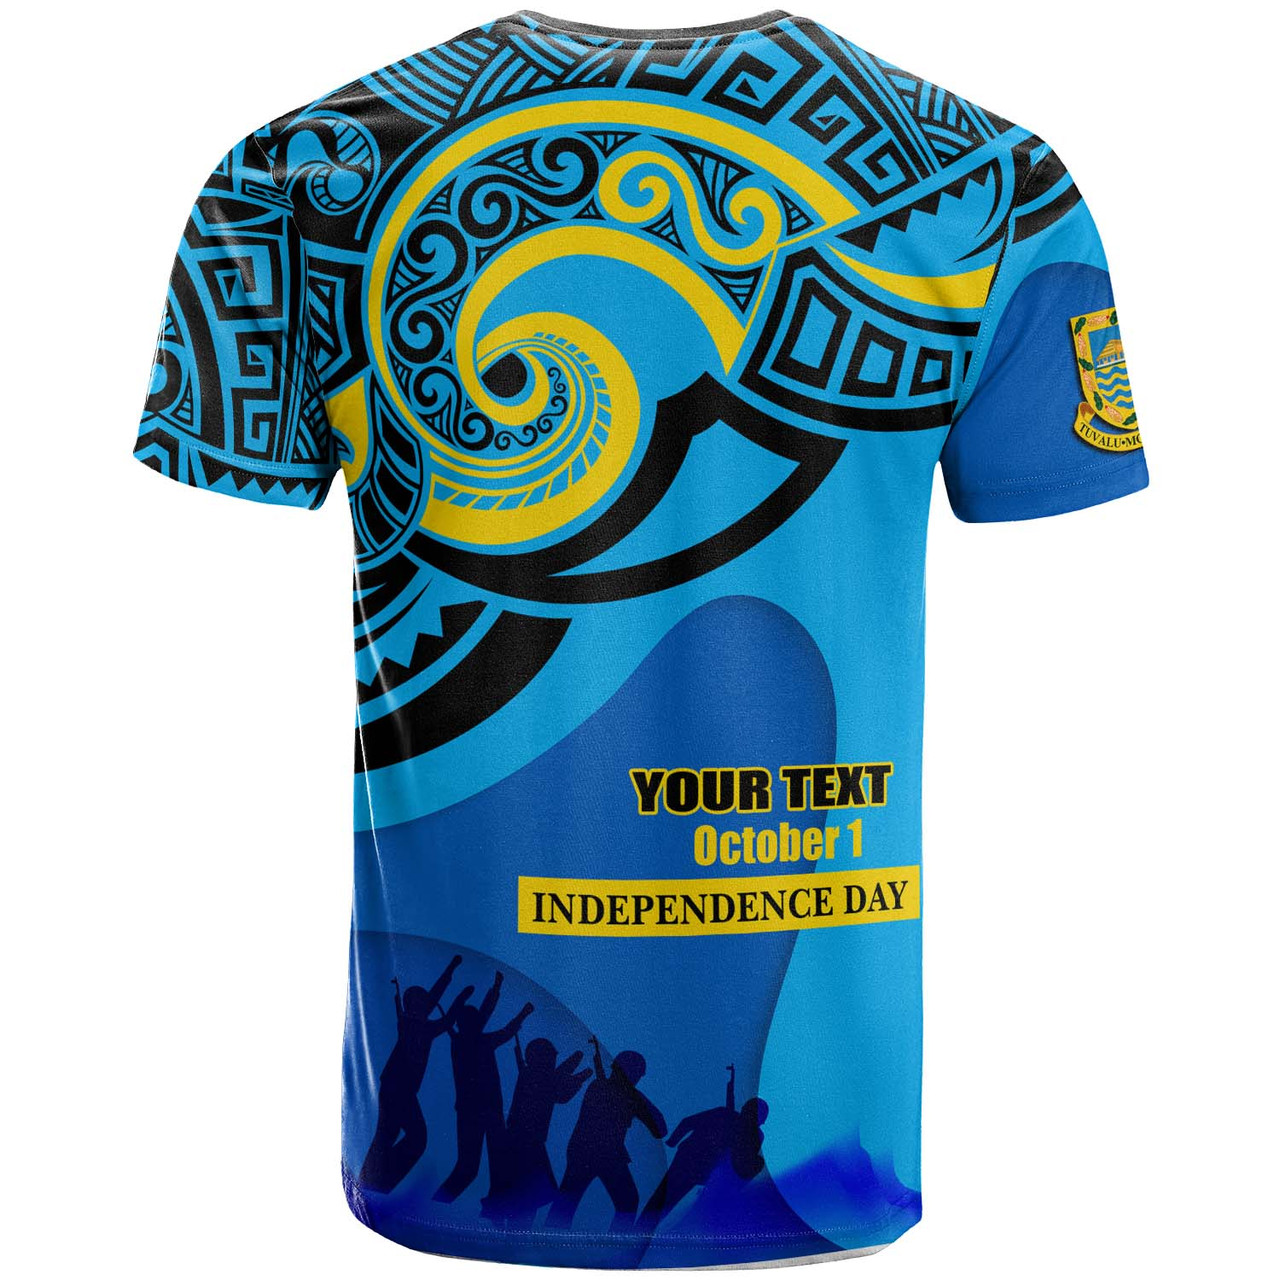 Tuvalu Polynesian Day T-shirt - Custom Happy Tuvalu Independence Day with Polynesian Culture T-shirt